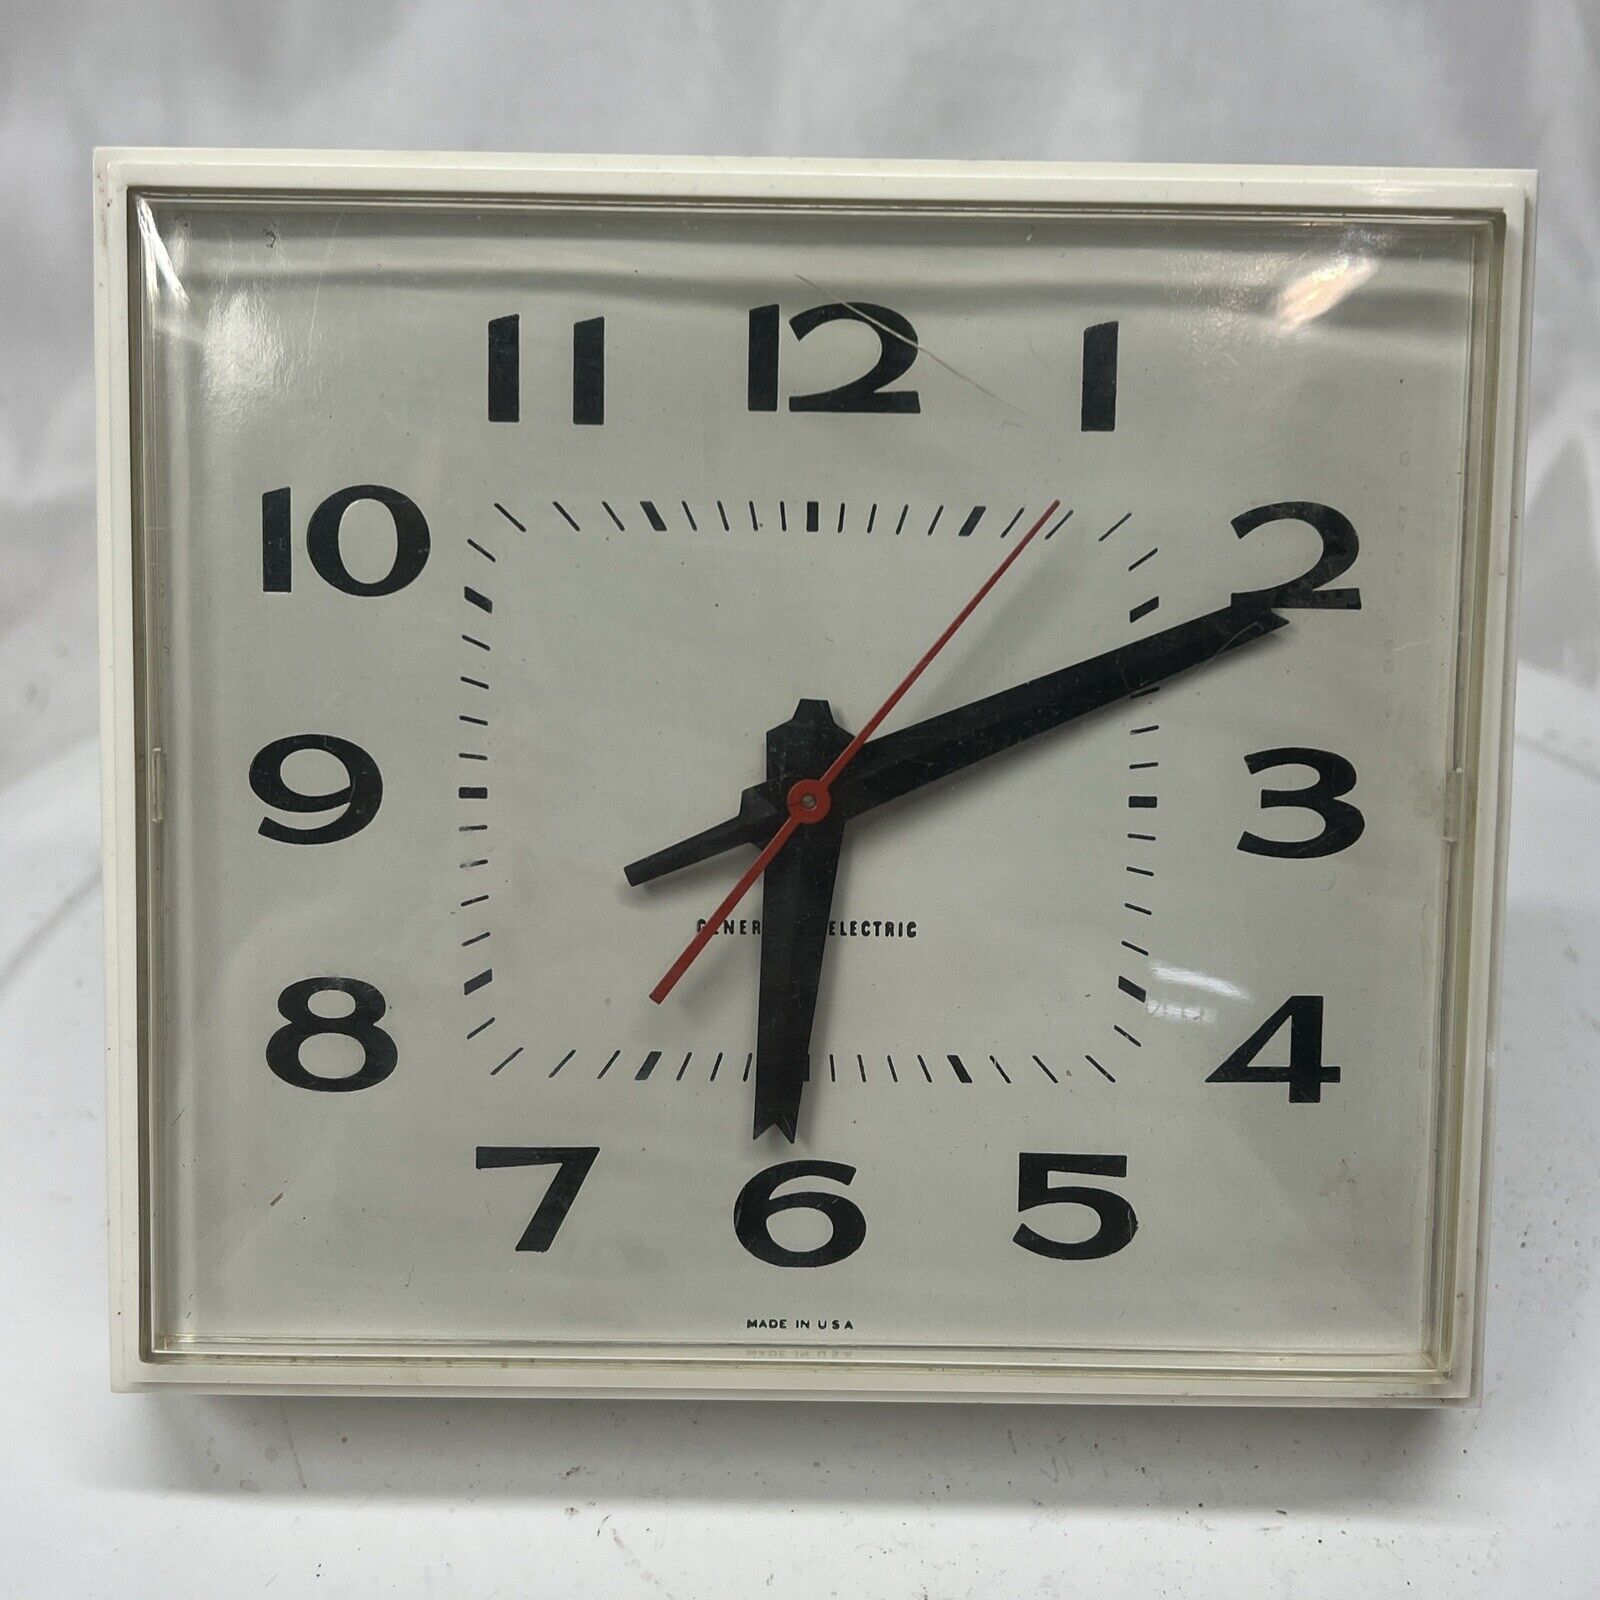 Vintage GENERAL ELECTRIC Square Wall Clock Model 2145 Works Great